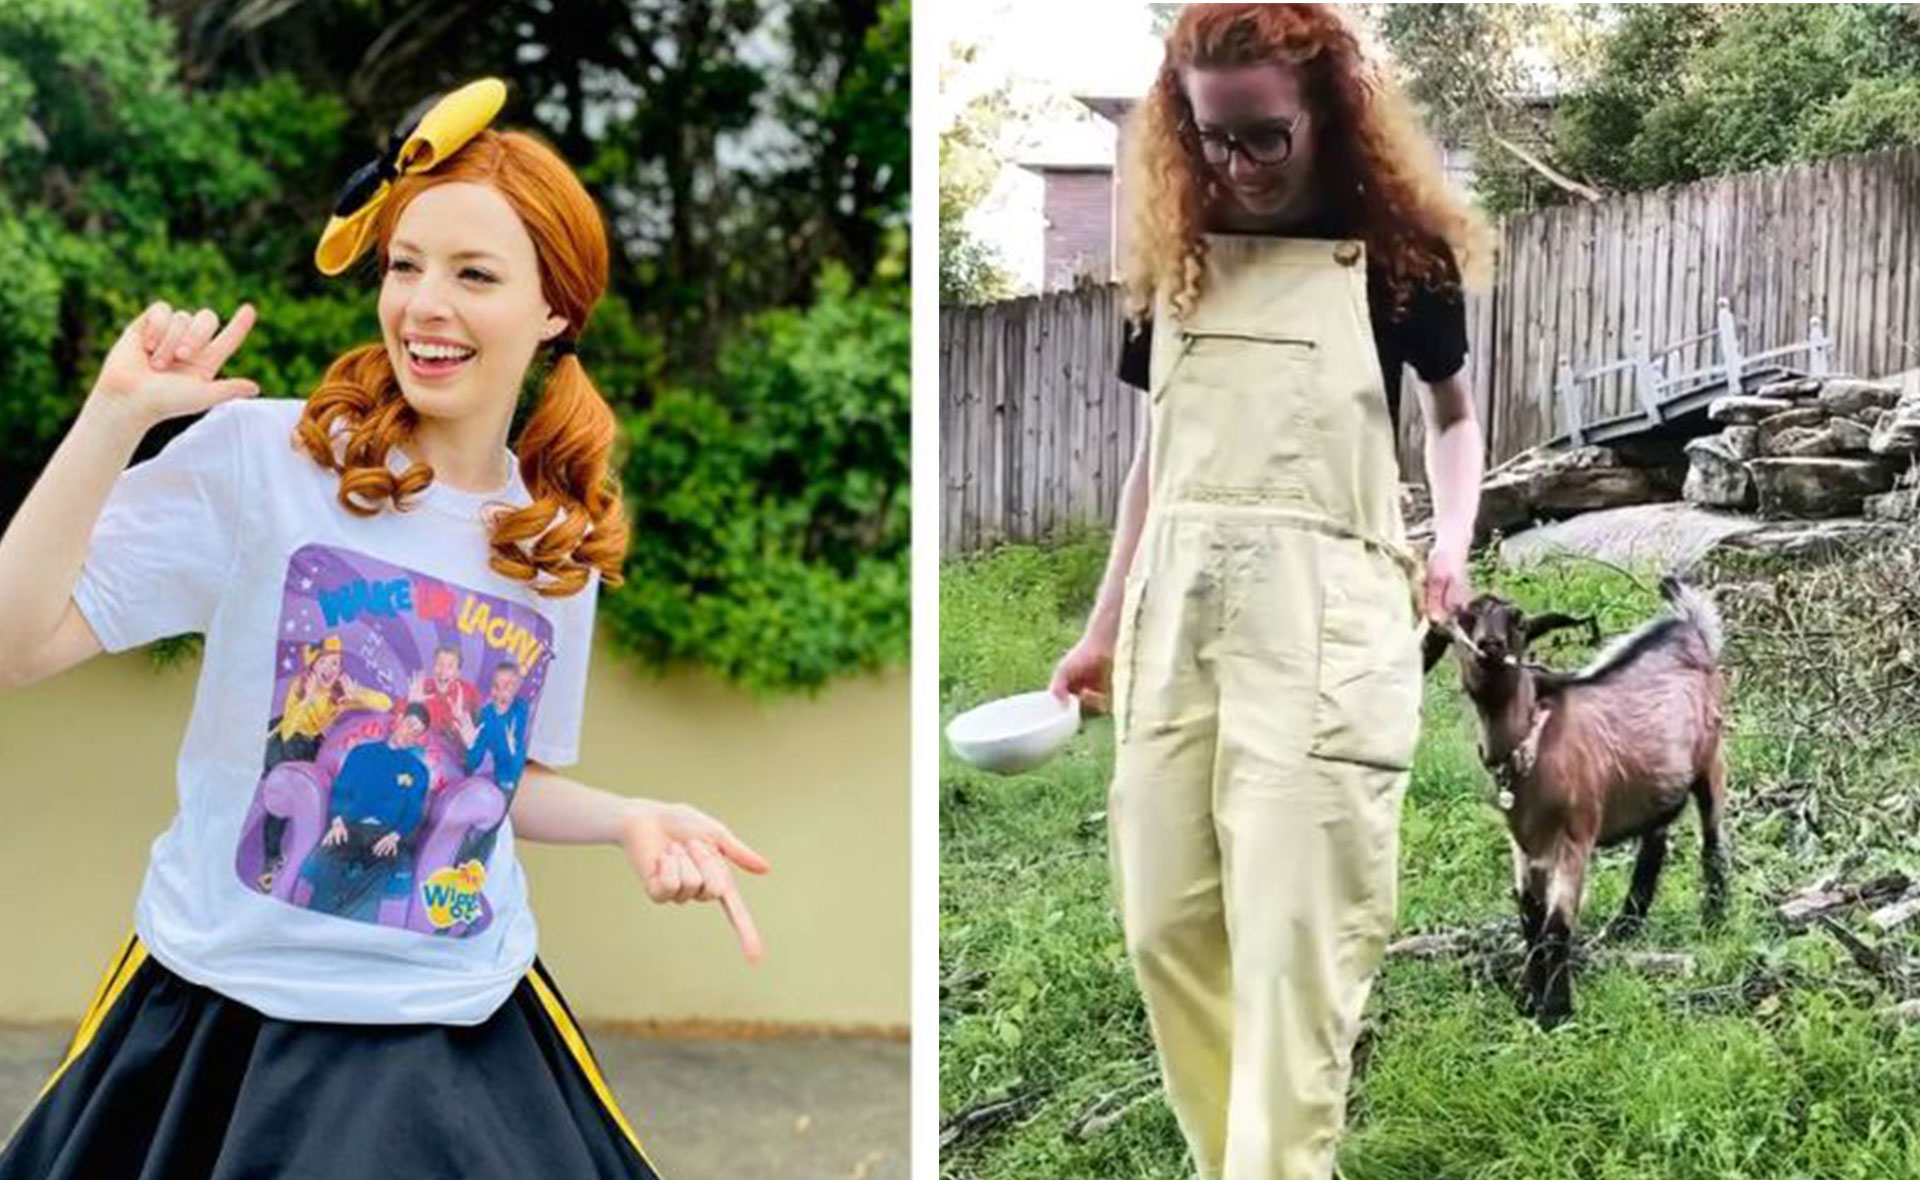 “Sending love to all women”: The powerful reason why Emma Watkins is donning yellow has nothing to do with her role in The Wiggles